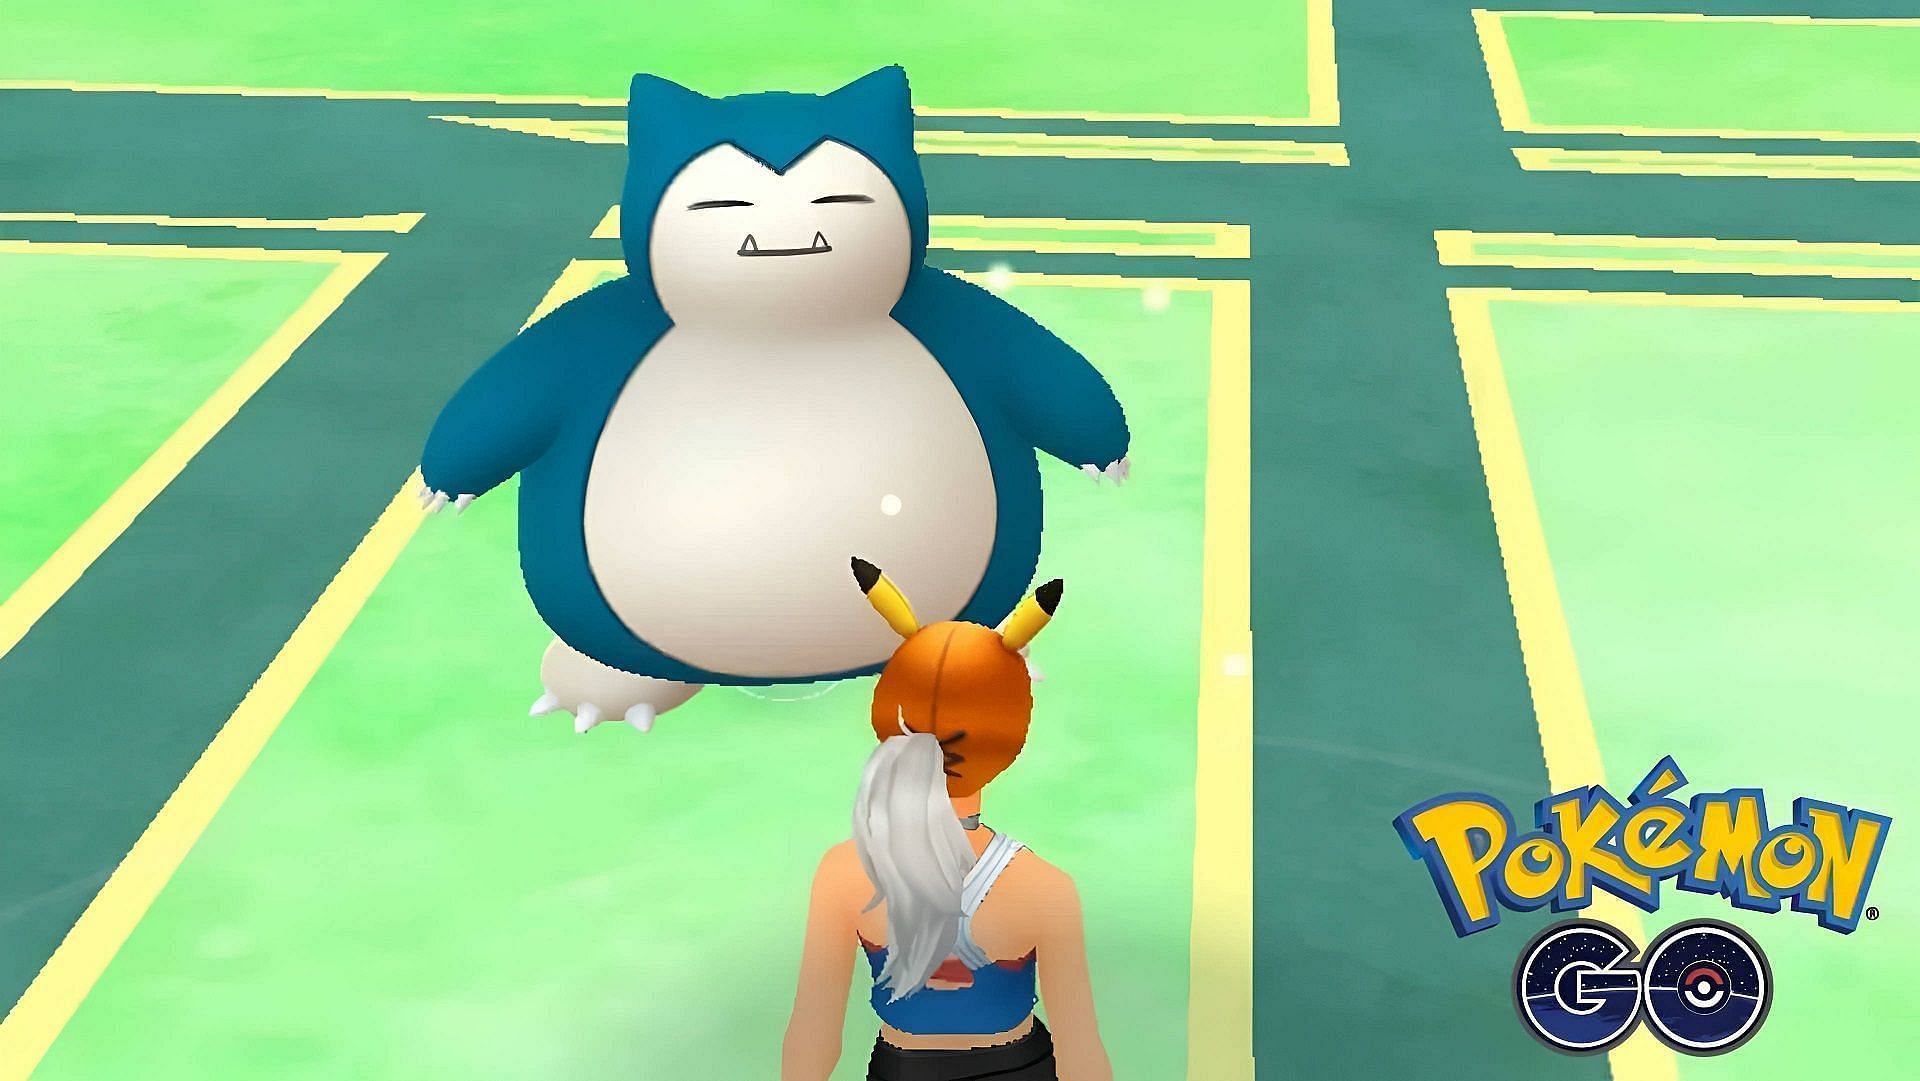 The Pokemon Snorlax took center stage in this LAPD debacle (Image via Niantic)